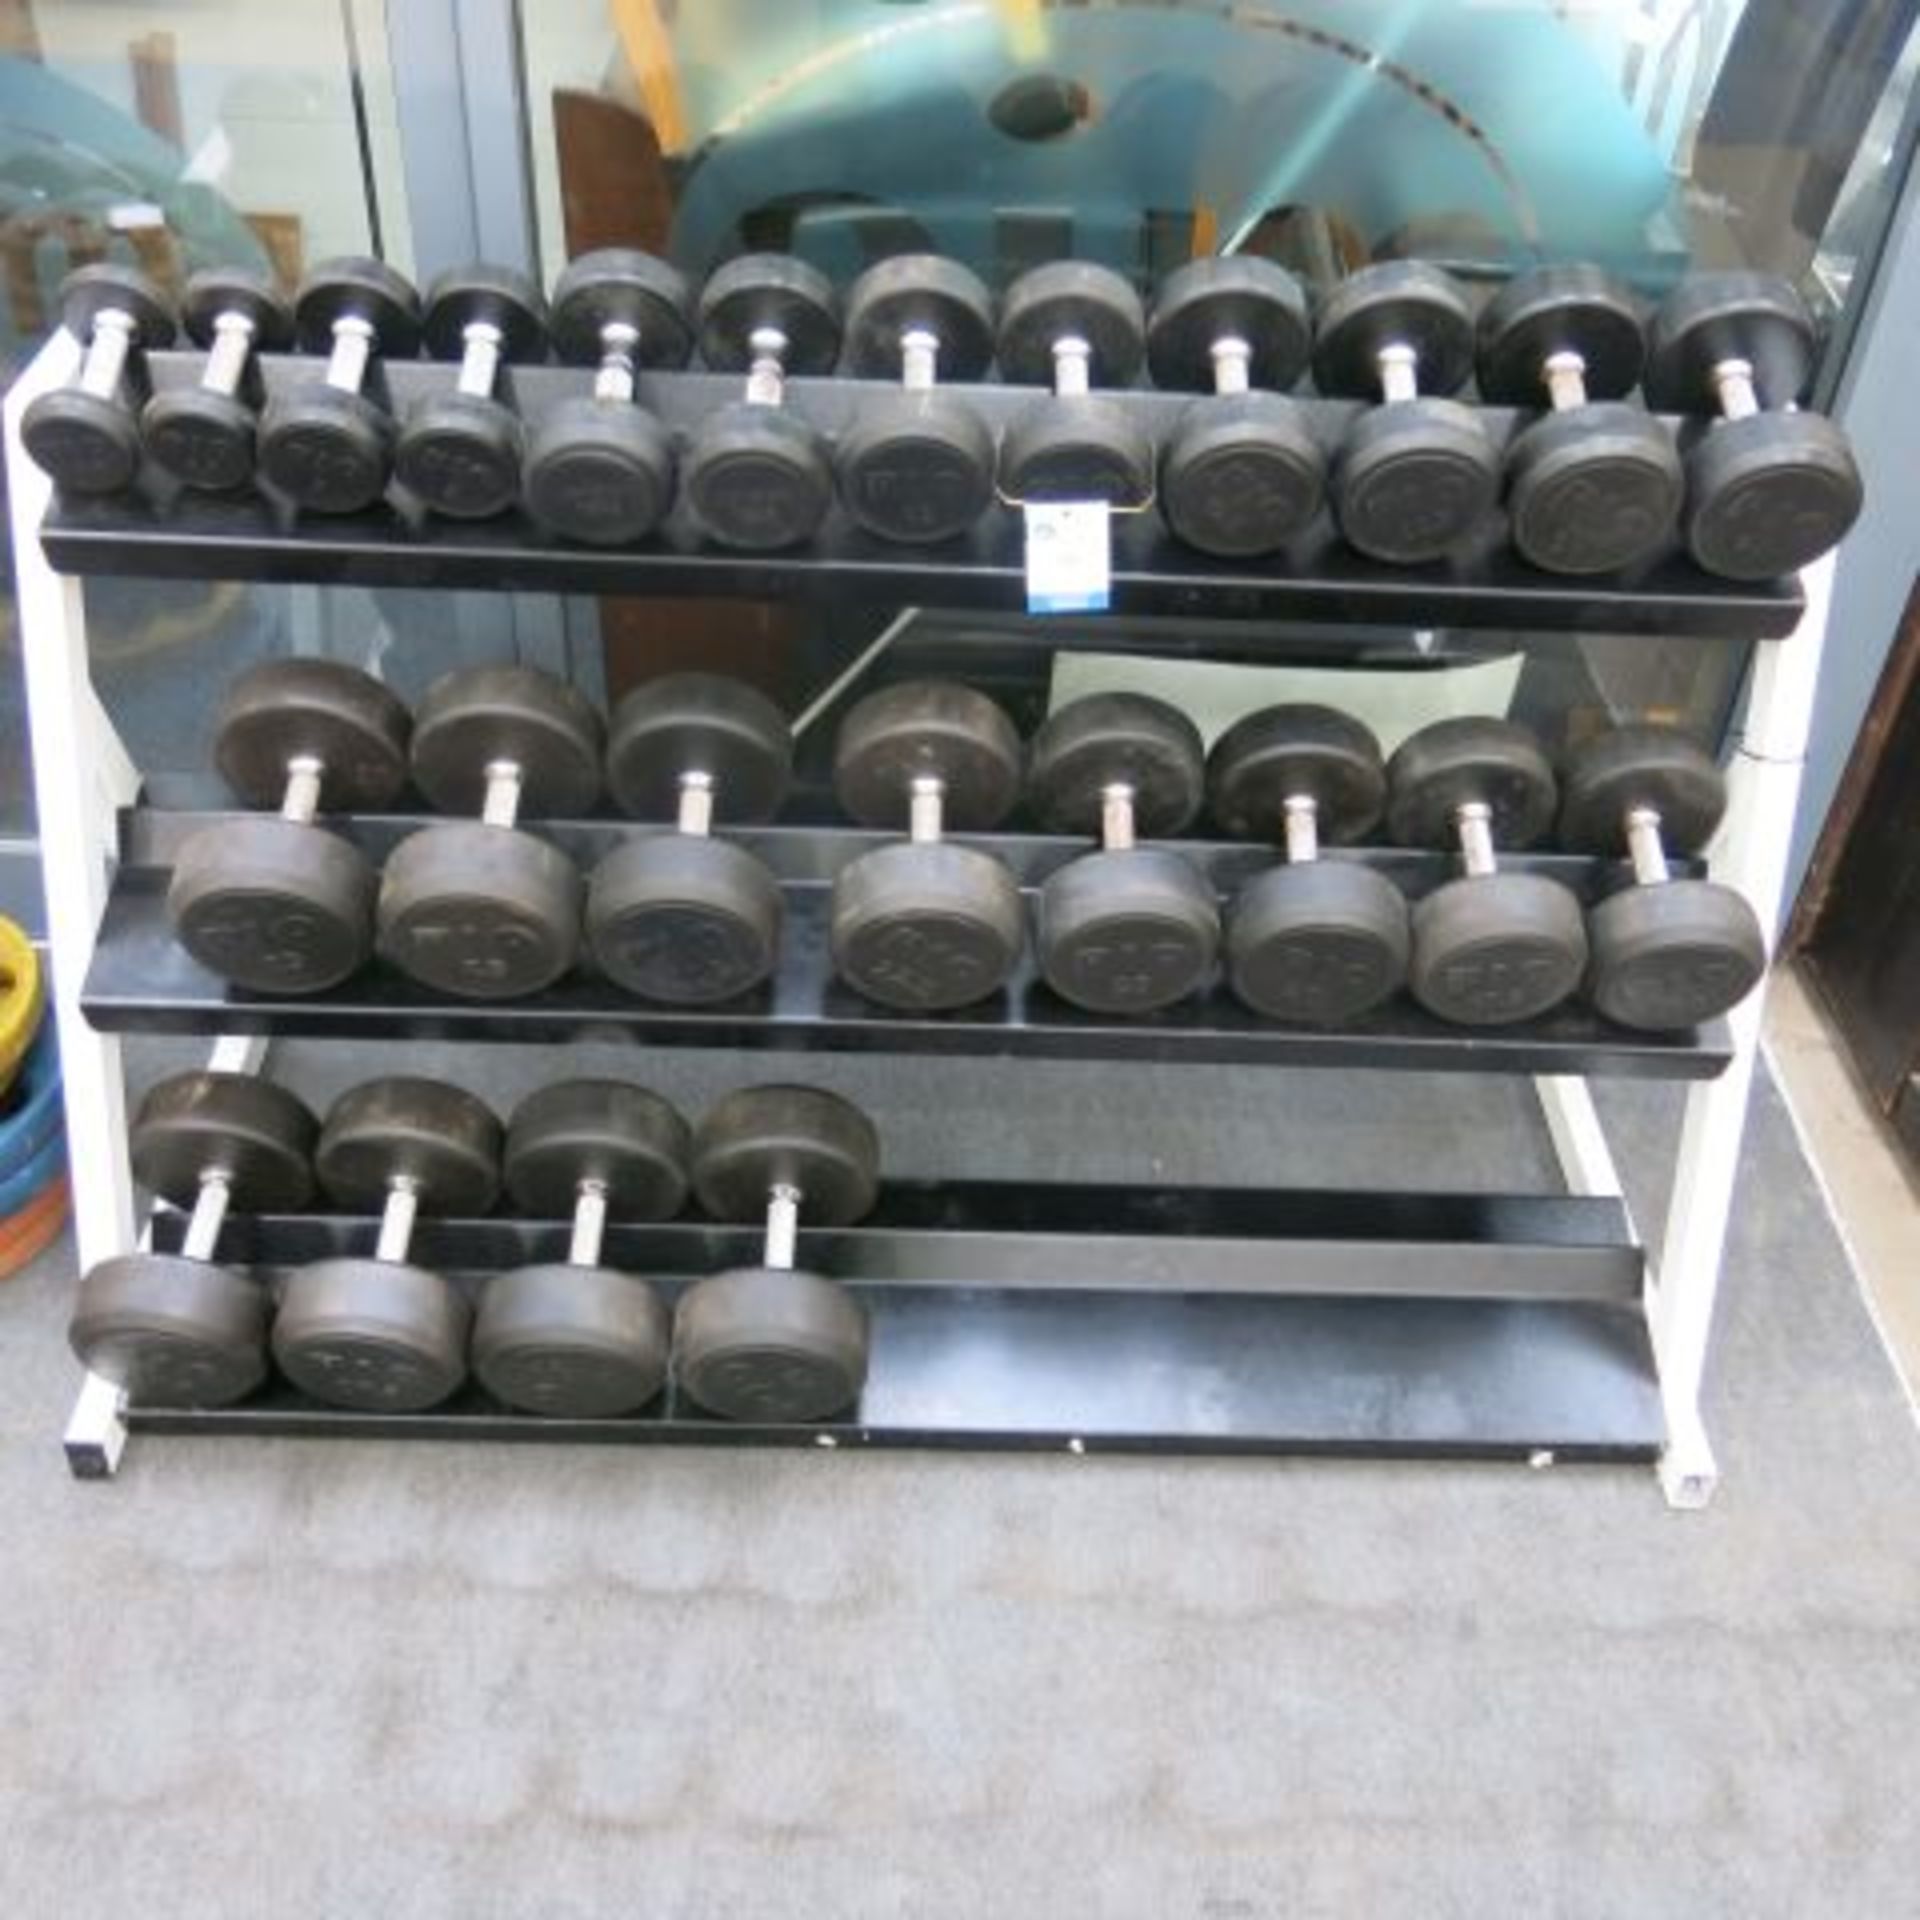 * 12 x Pairs of Rubber covered Dumbbells, 2.5KG- 30KG c/w a Pullum three tier Weight Rack. Please